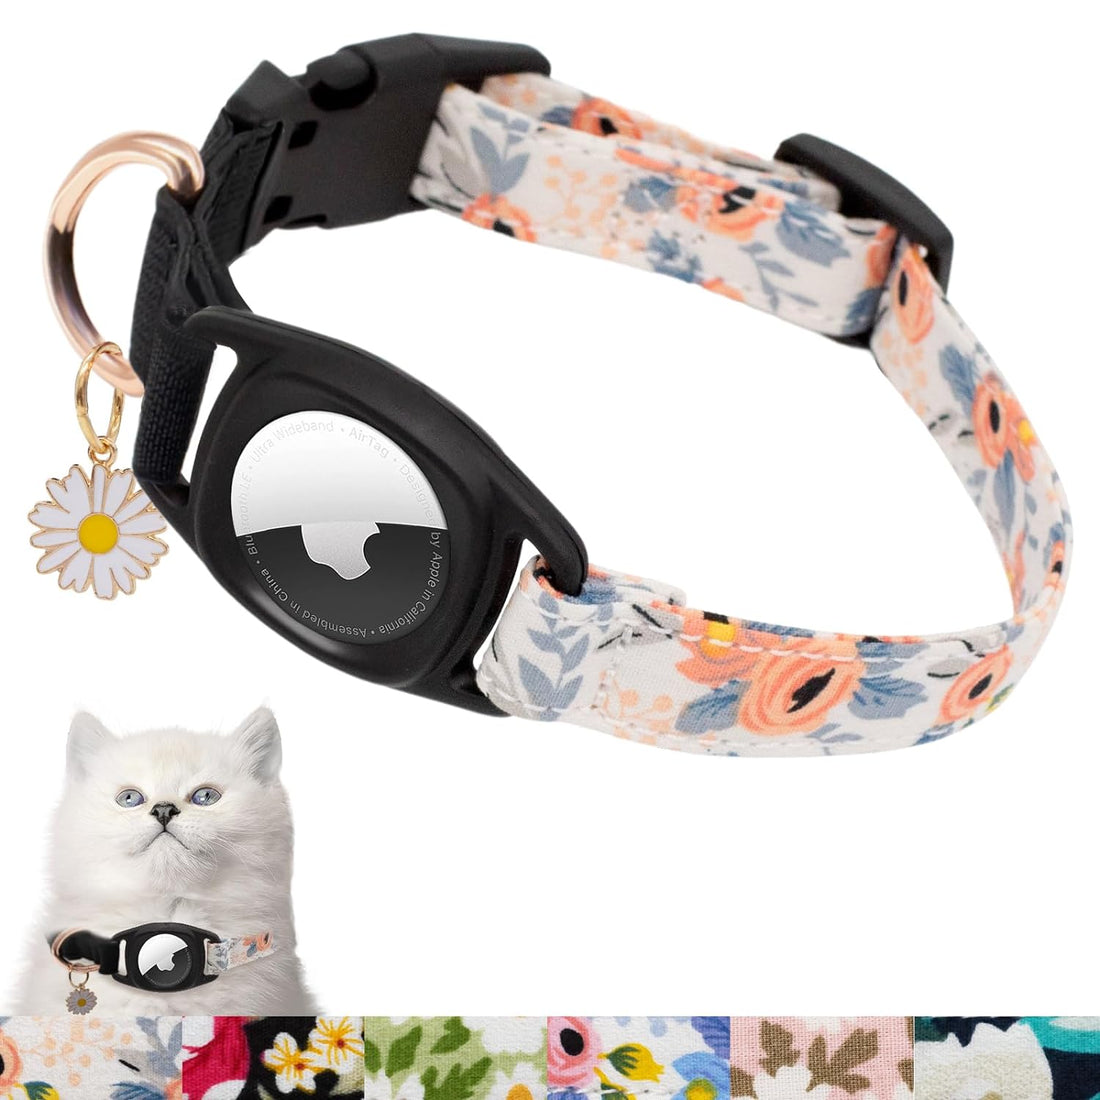 HSIGIO Airtag Cat Collar, GPS Cat Collar with Apple Air Tag Holder and Flower Charm, Floral Cat Tracker Collar in 0.6 Inches Width for Girl Boy Cats, Kittens and Puppies(Orange Flower, 9.4-12.5inch)